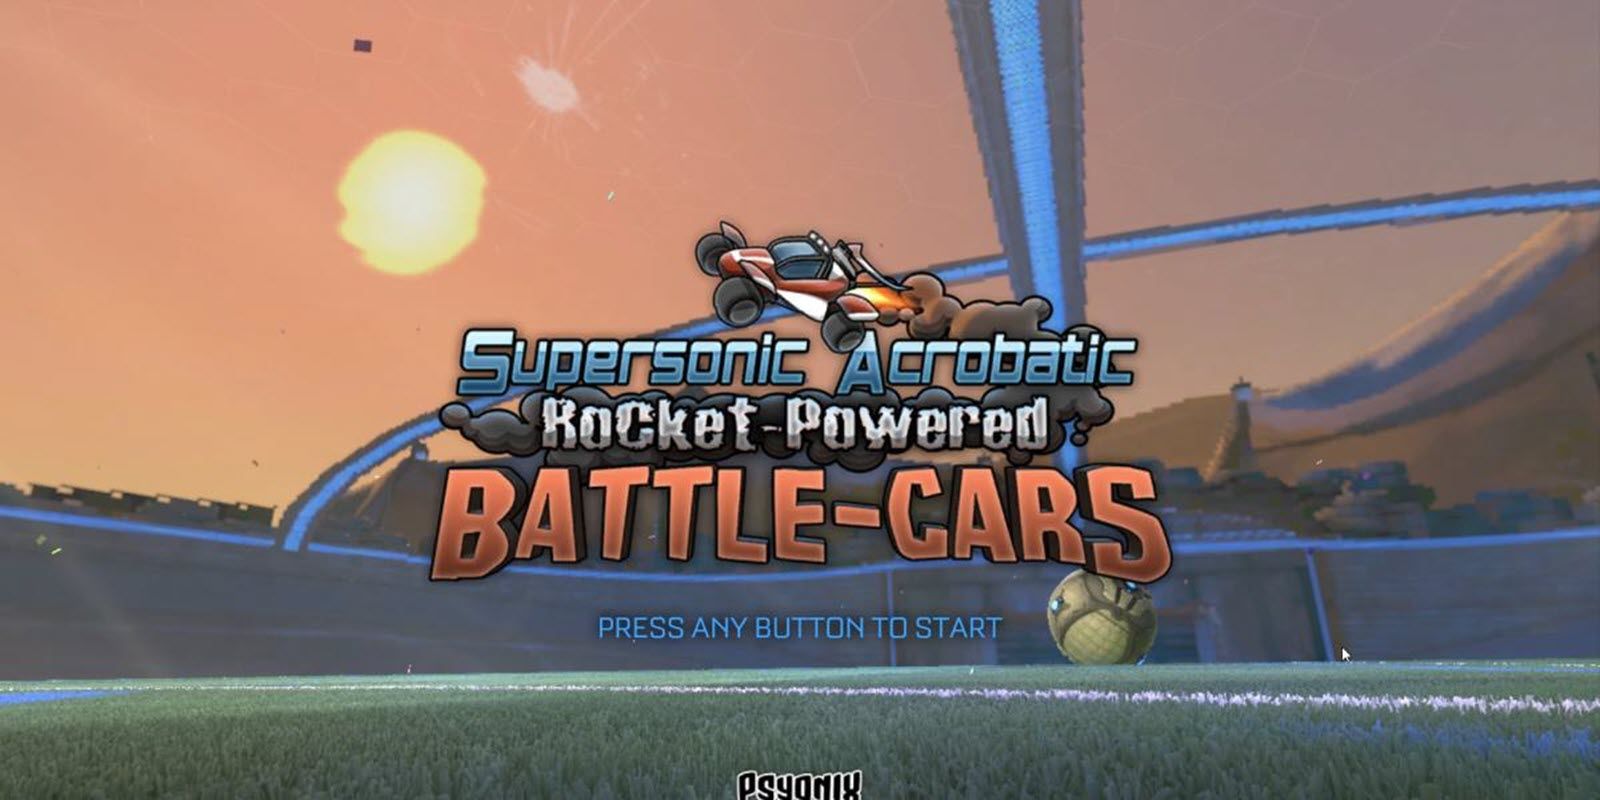 The Supersonic Acrobatic Rocket-Powered Battle-Cars title screen.